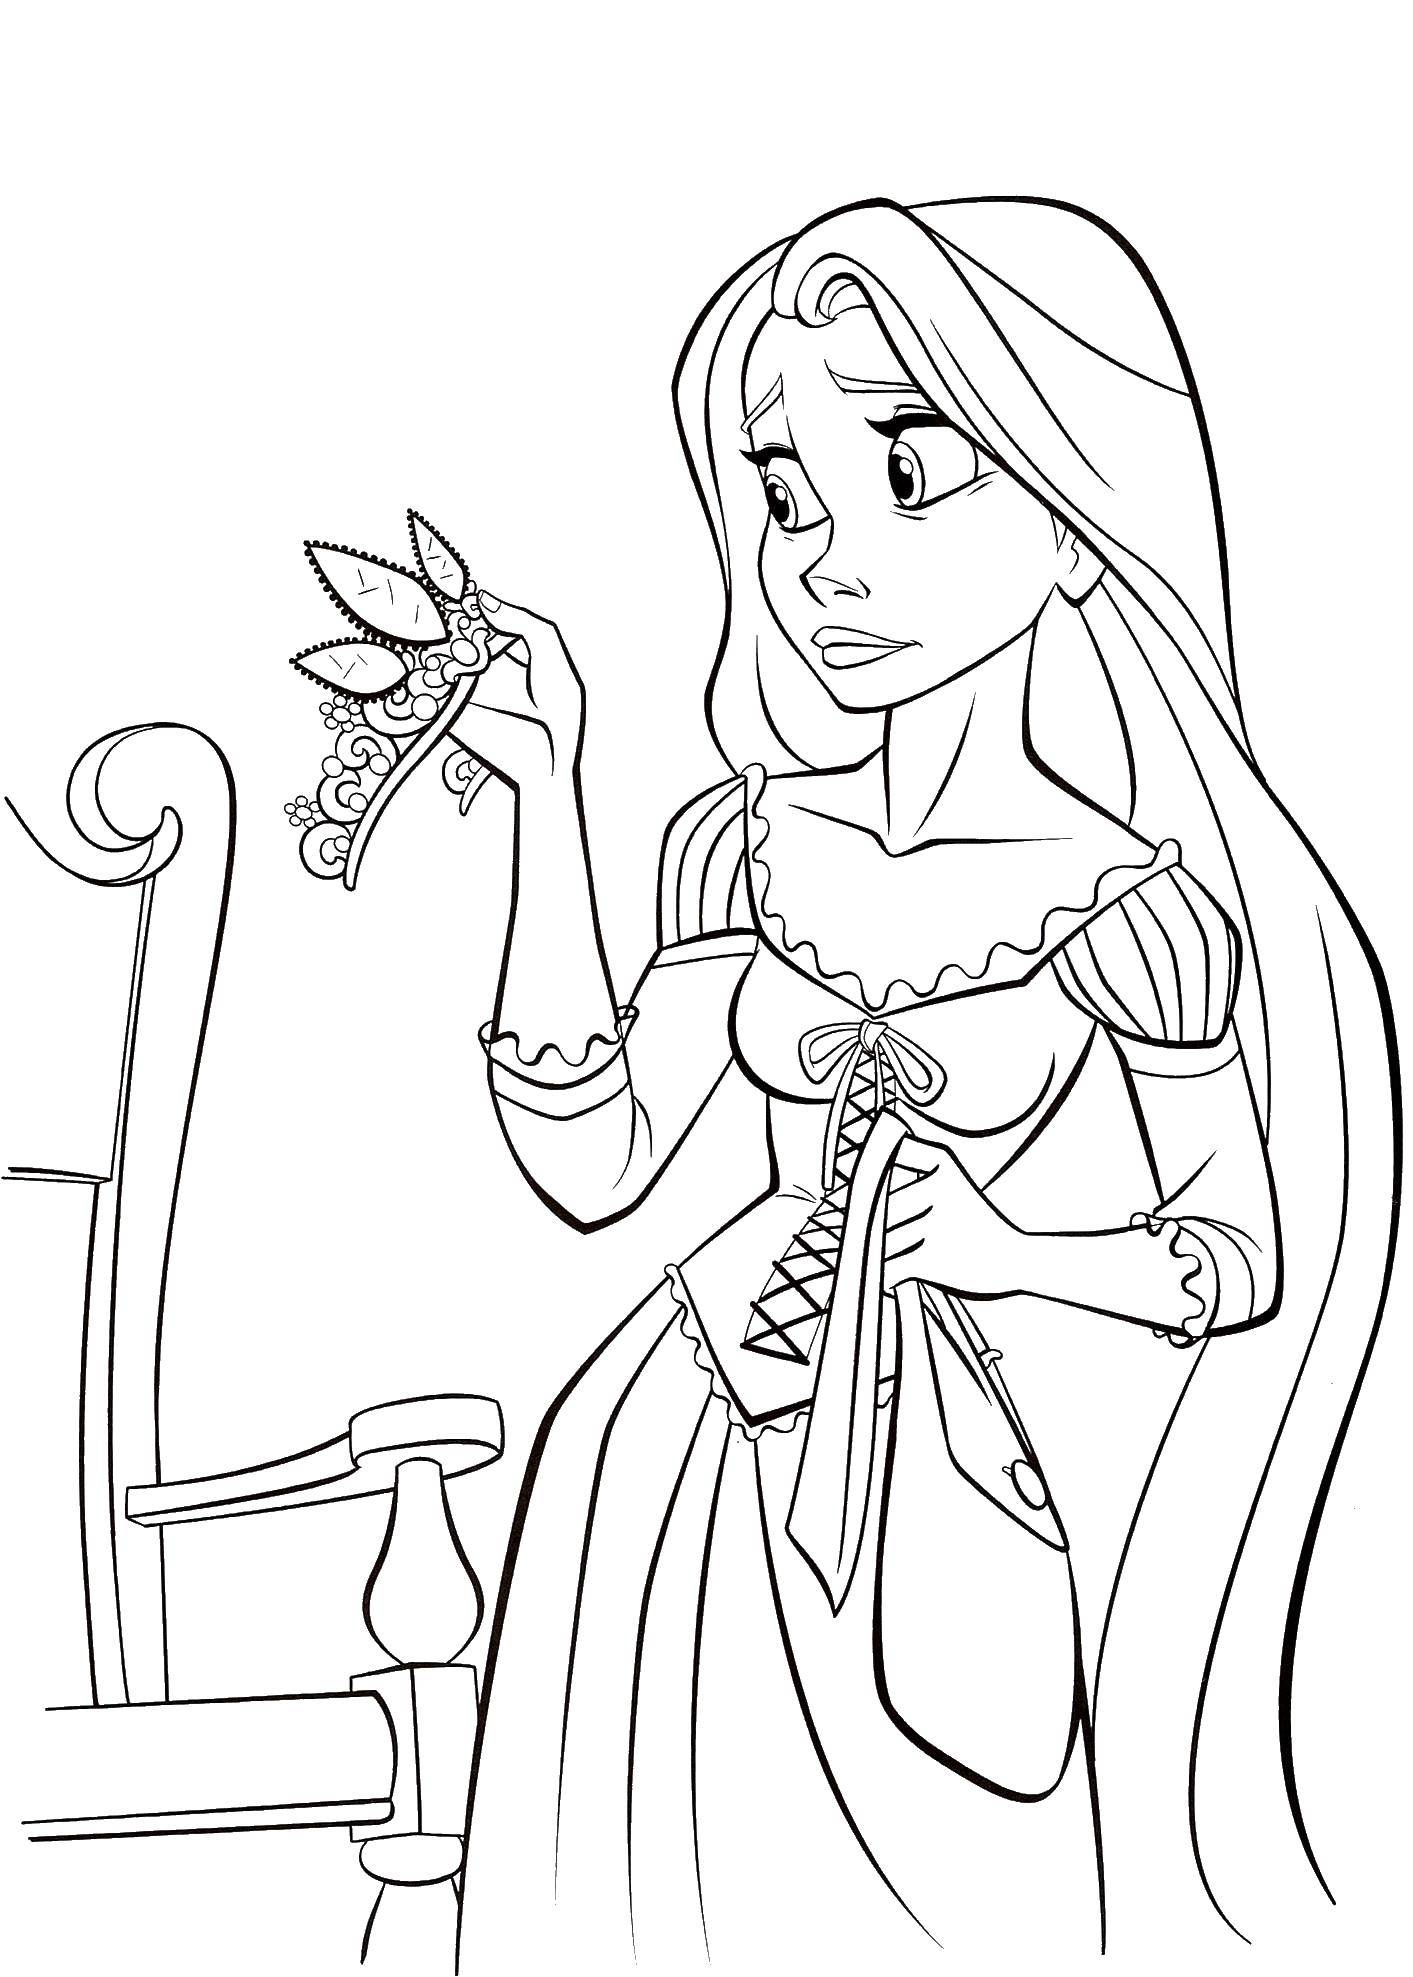 Coloring Princess with crown. Category Disney coloring pages. Tags:  Princess, crown, hair.